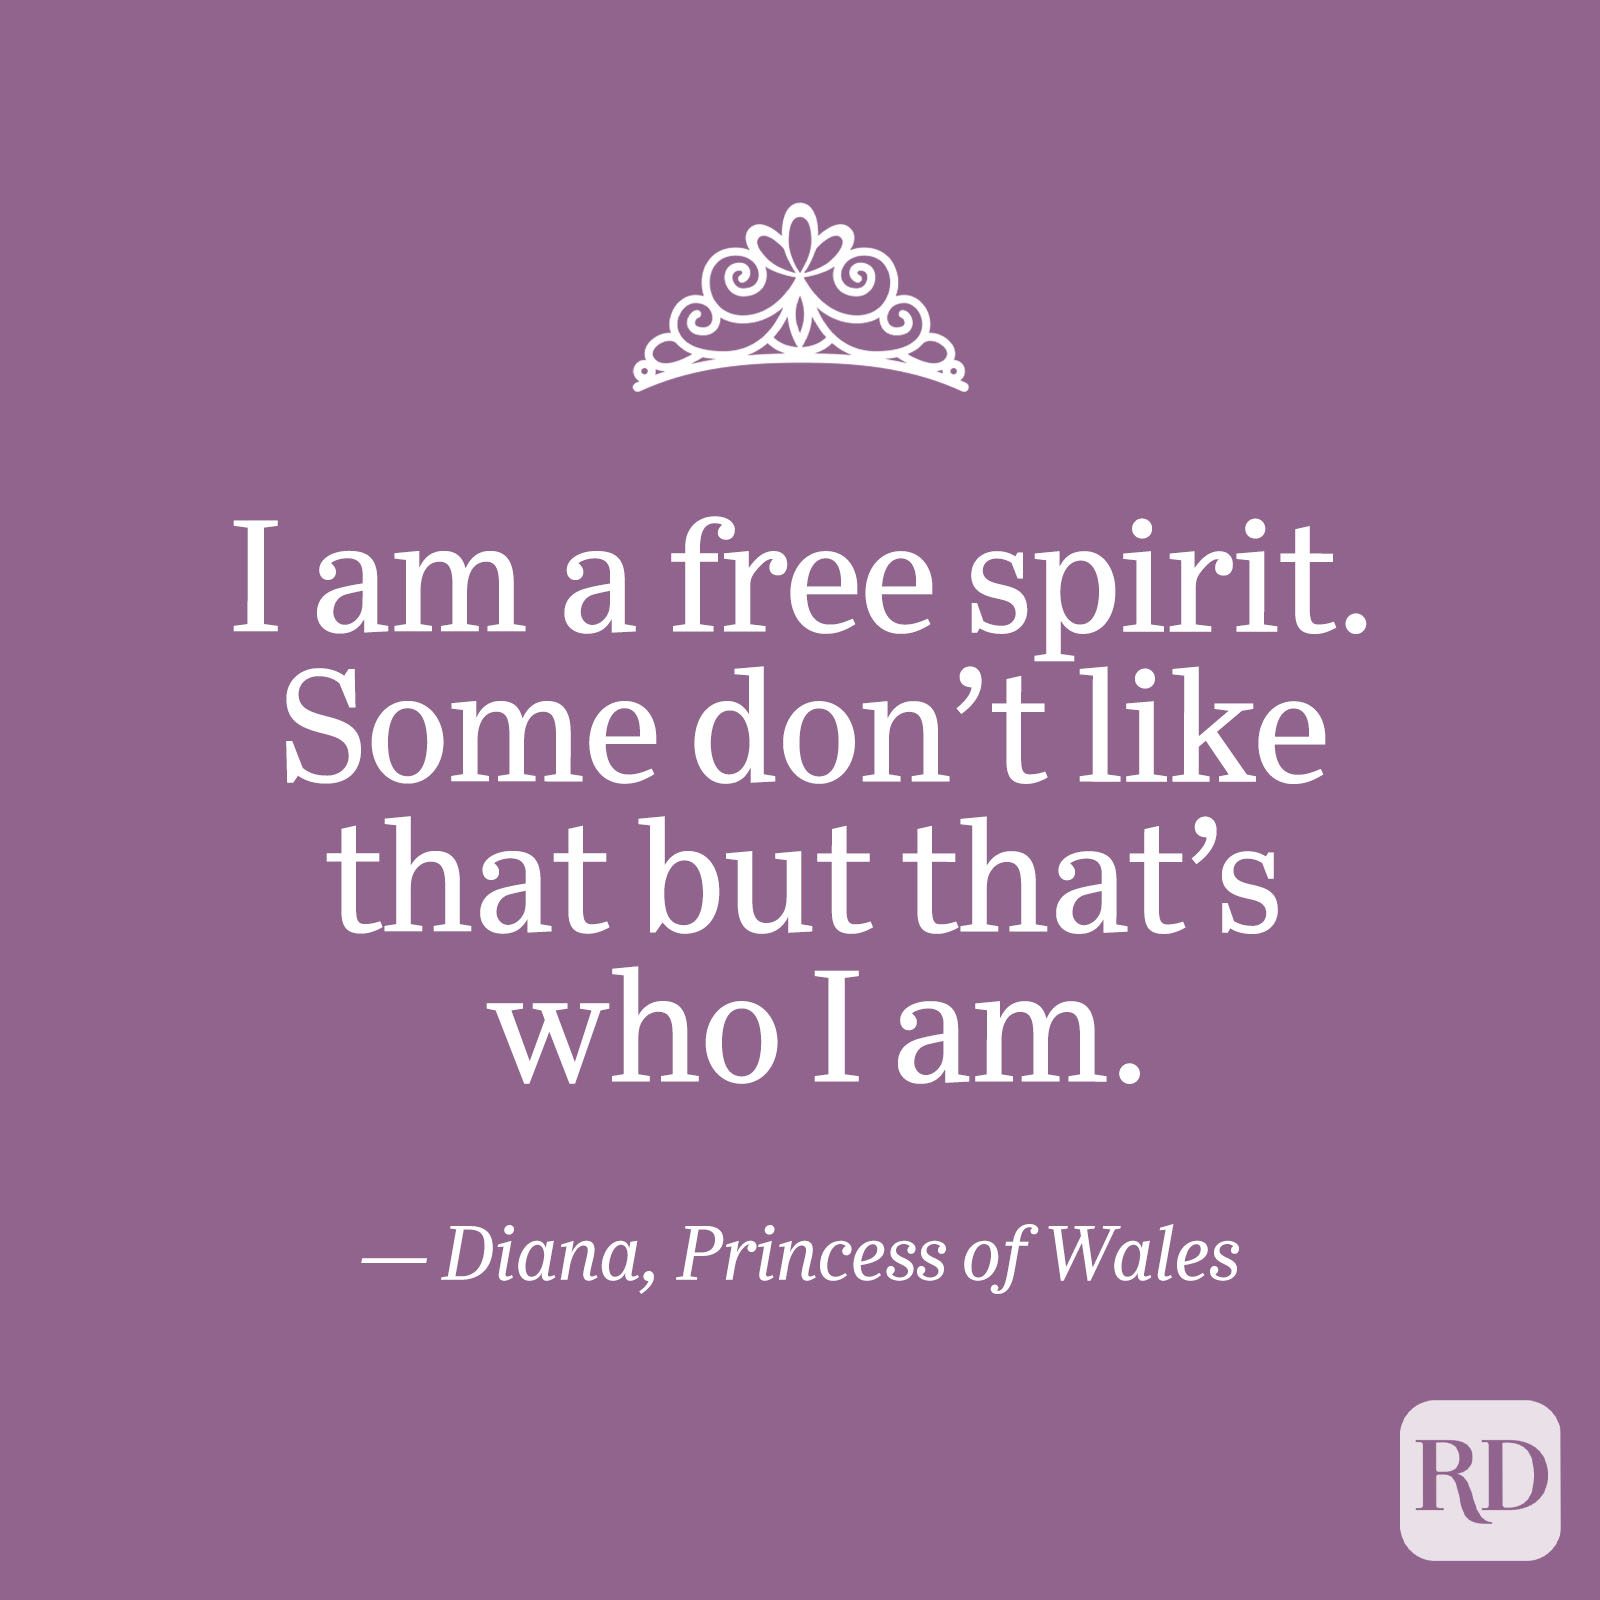 26 Princess Diana Quotes—Inspiring Quotes from the People’s Princess